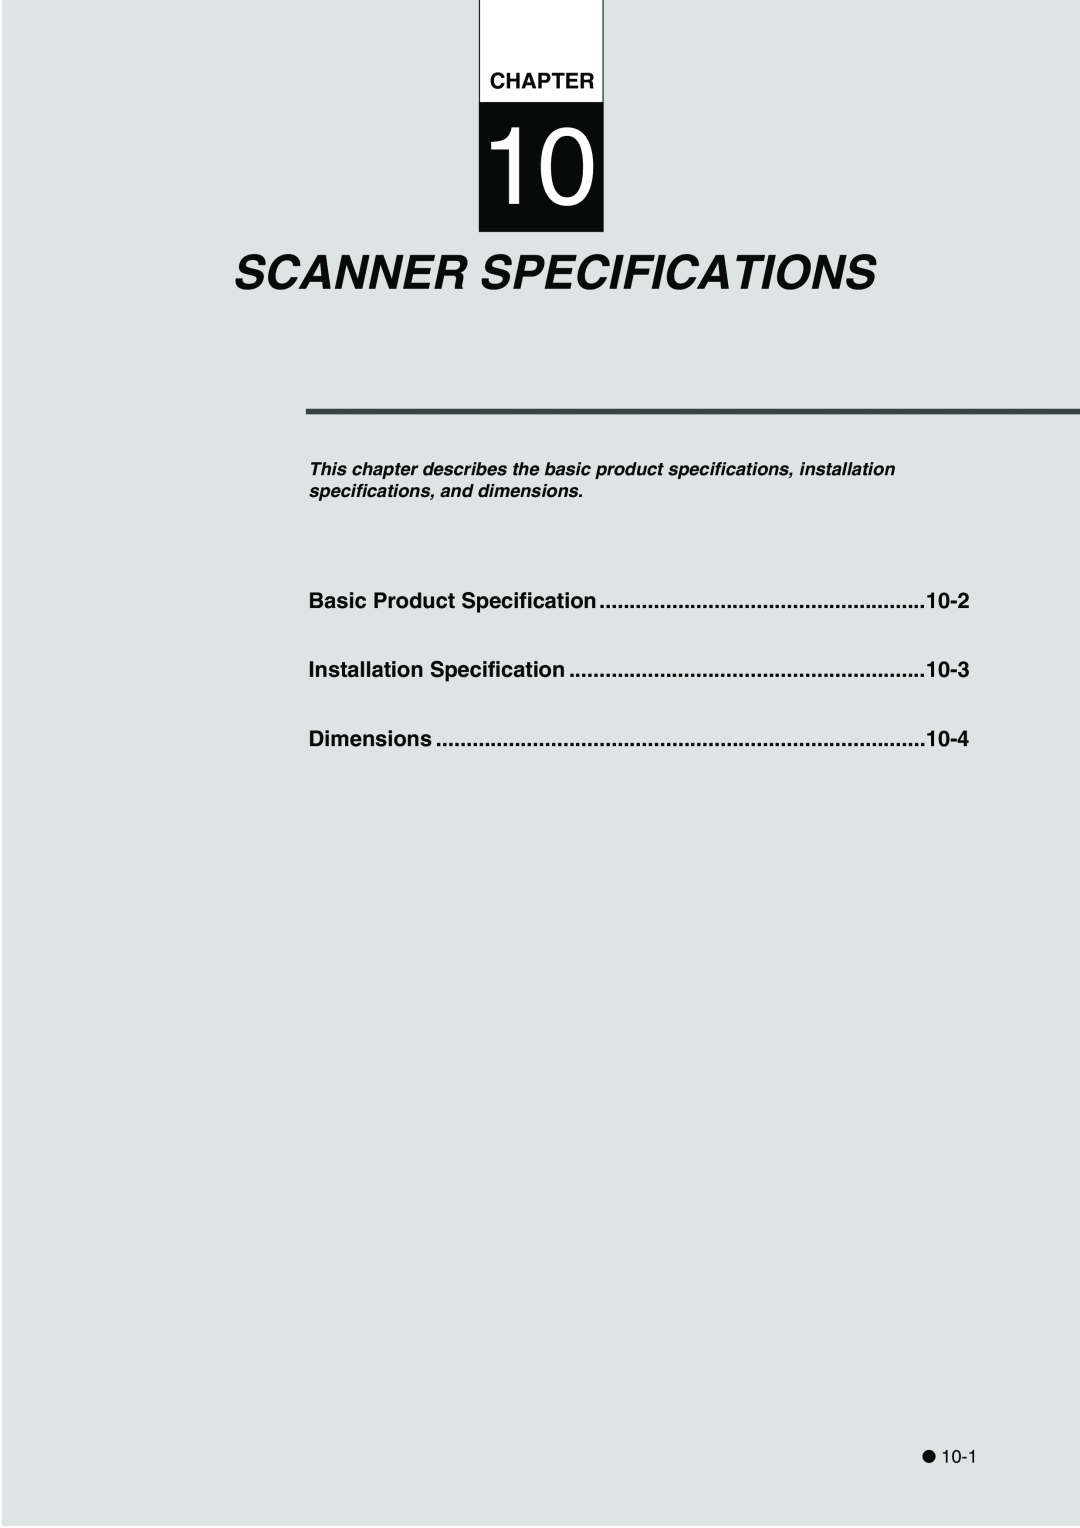 Fujitsu fi-4340C Scanner Specifications, Chapter, Basic Product Specification, 10-2, Installation Specification, 10-3 